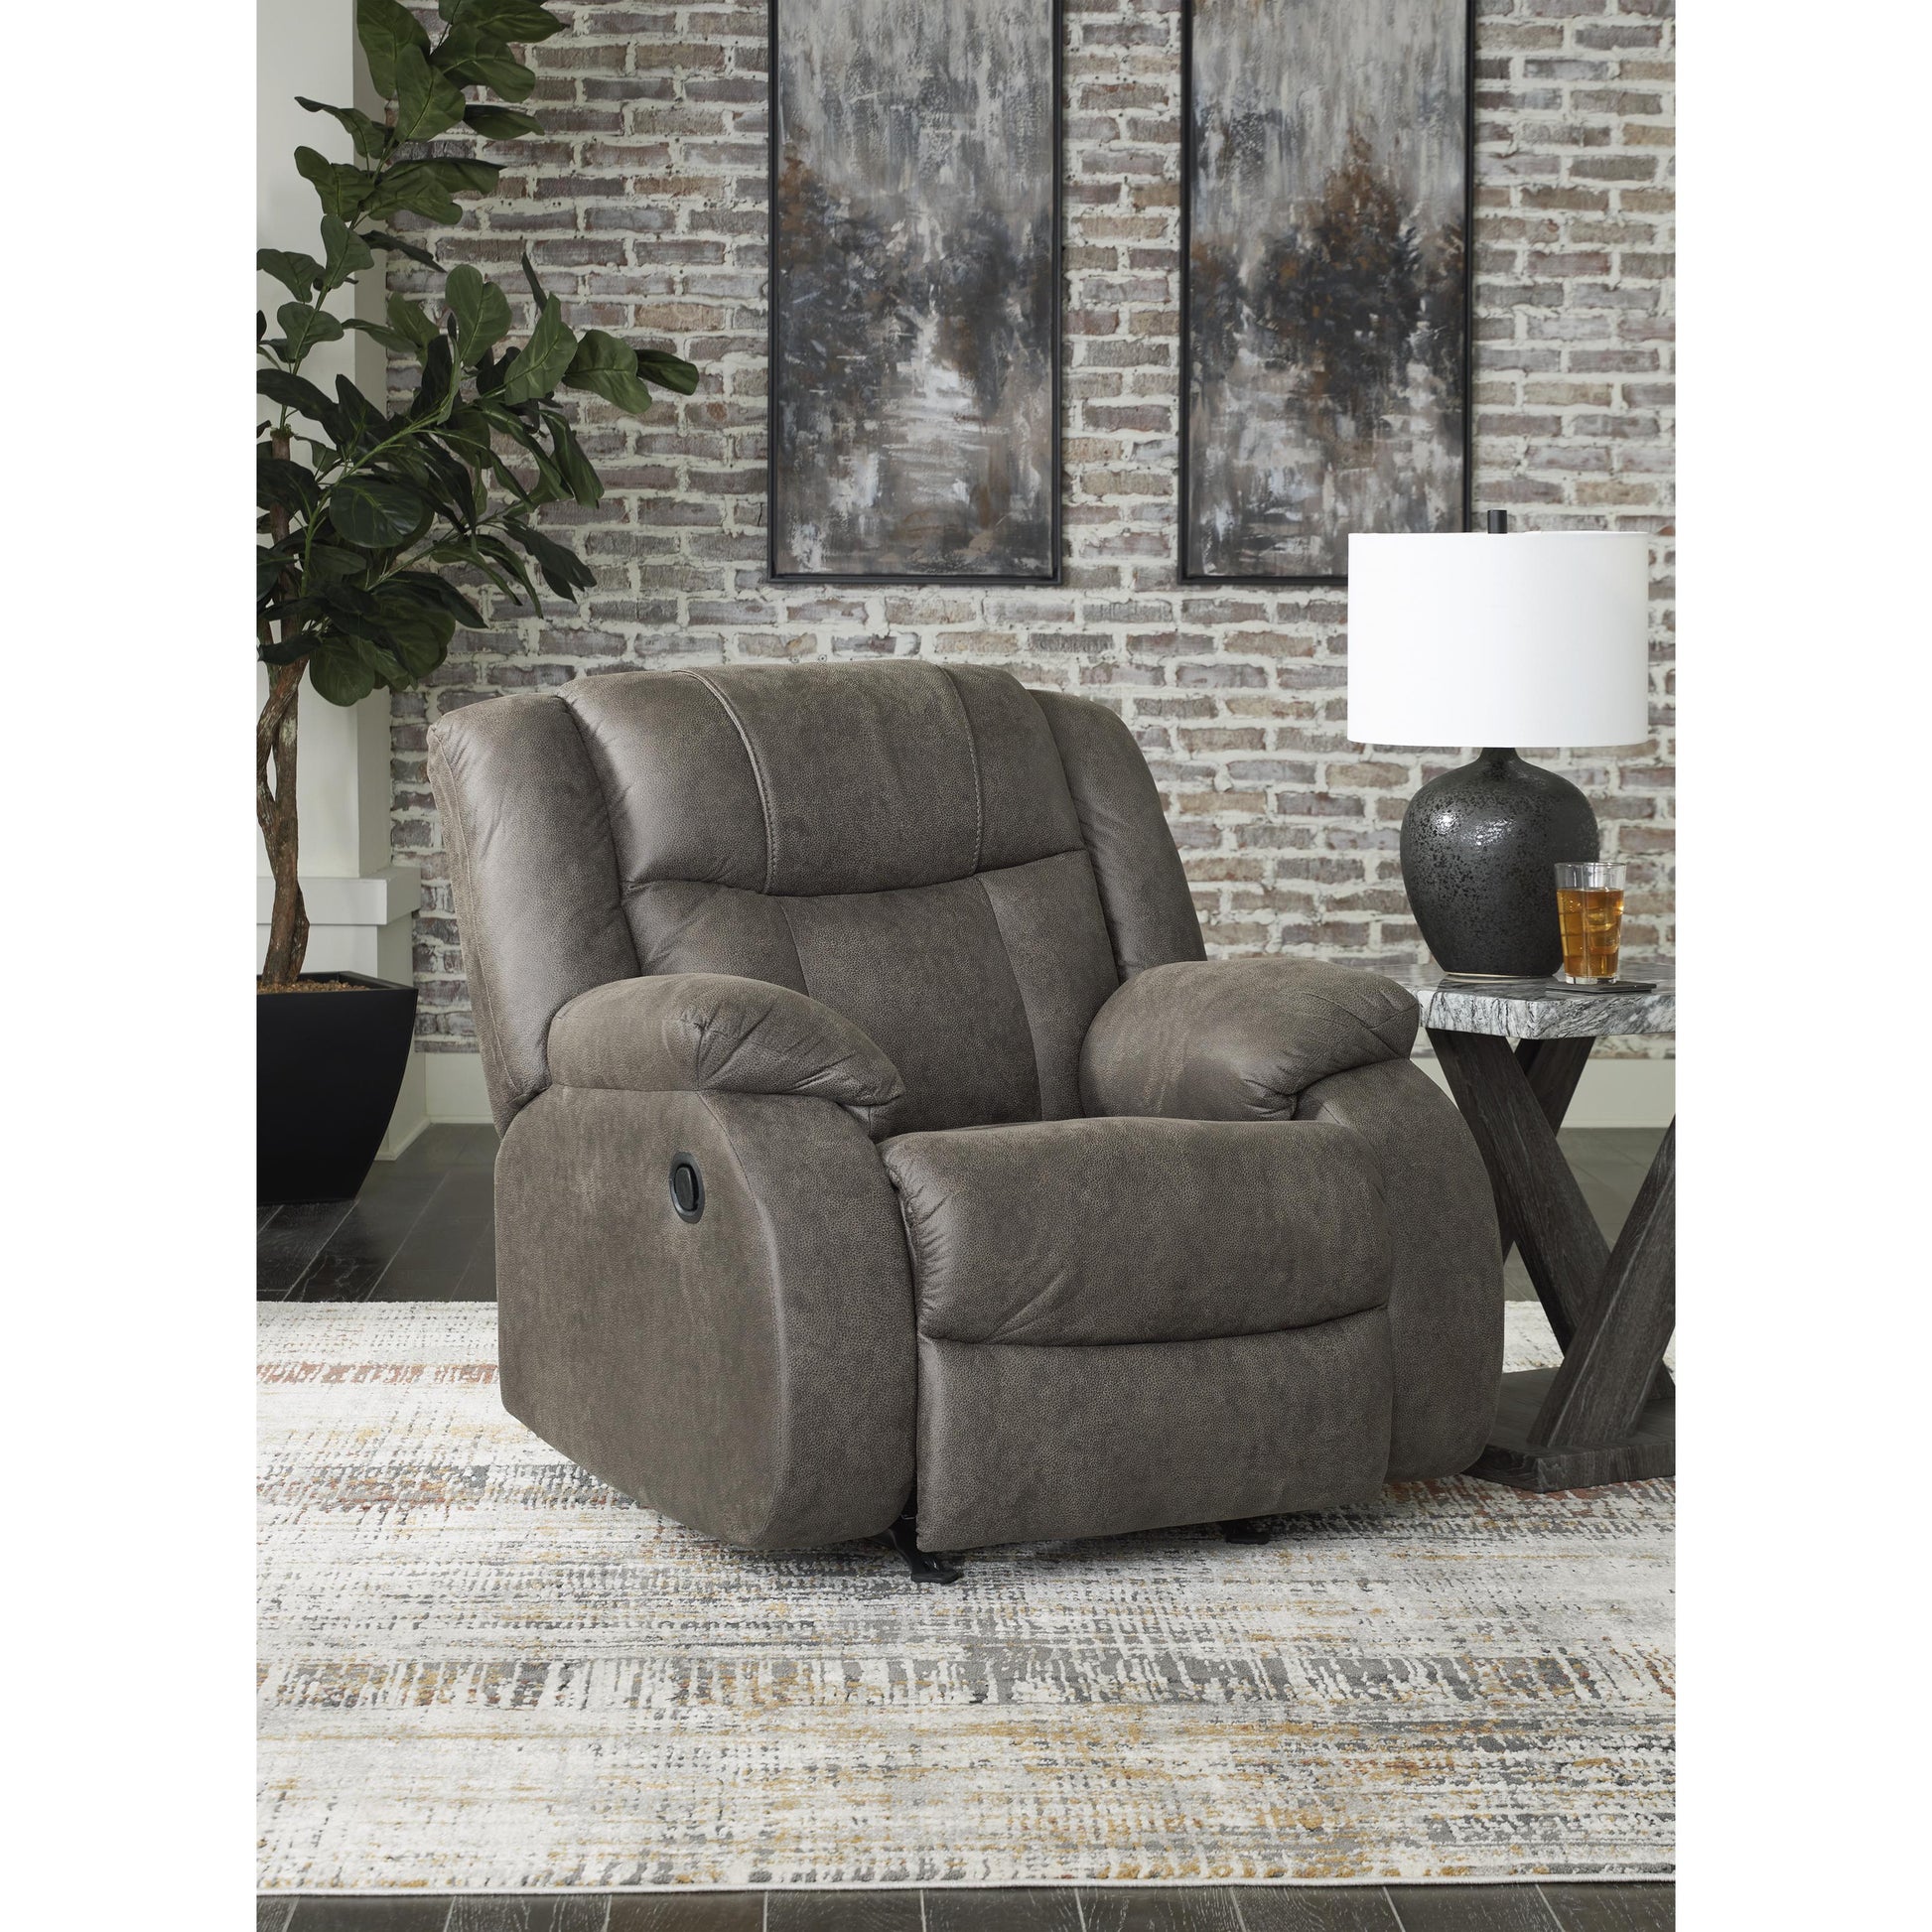 Signature Design by Ashley First Base Rocker Leather Look Recliner 6880425 IMAGE 6